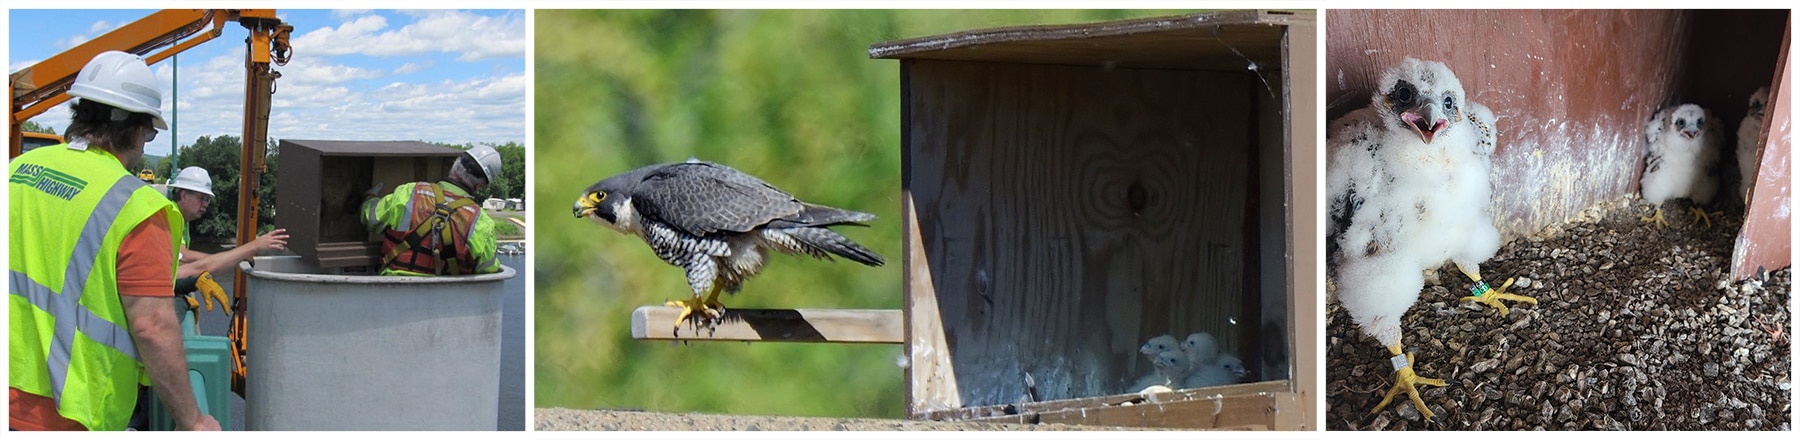 Installation of peregrine falcon nesting boxes, a mother peregrine falcon with her chicks in a nesting box, and a close up of the peregrine falcon chicks